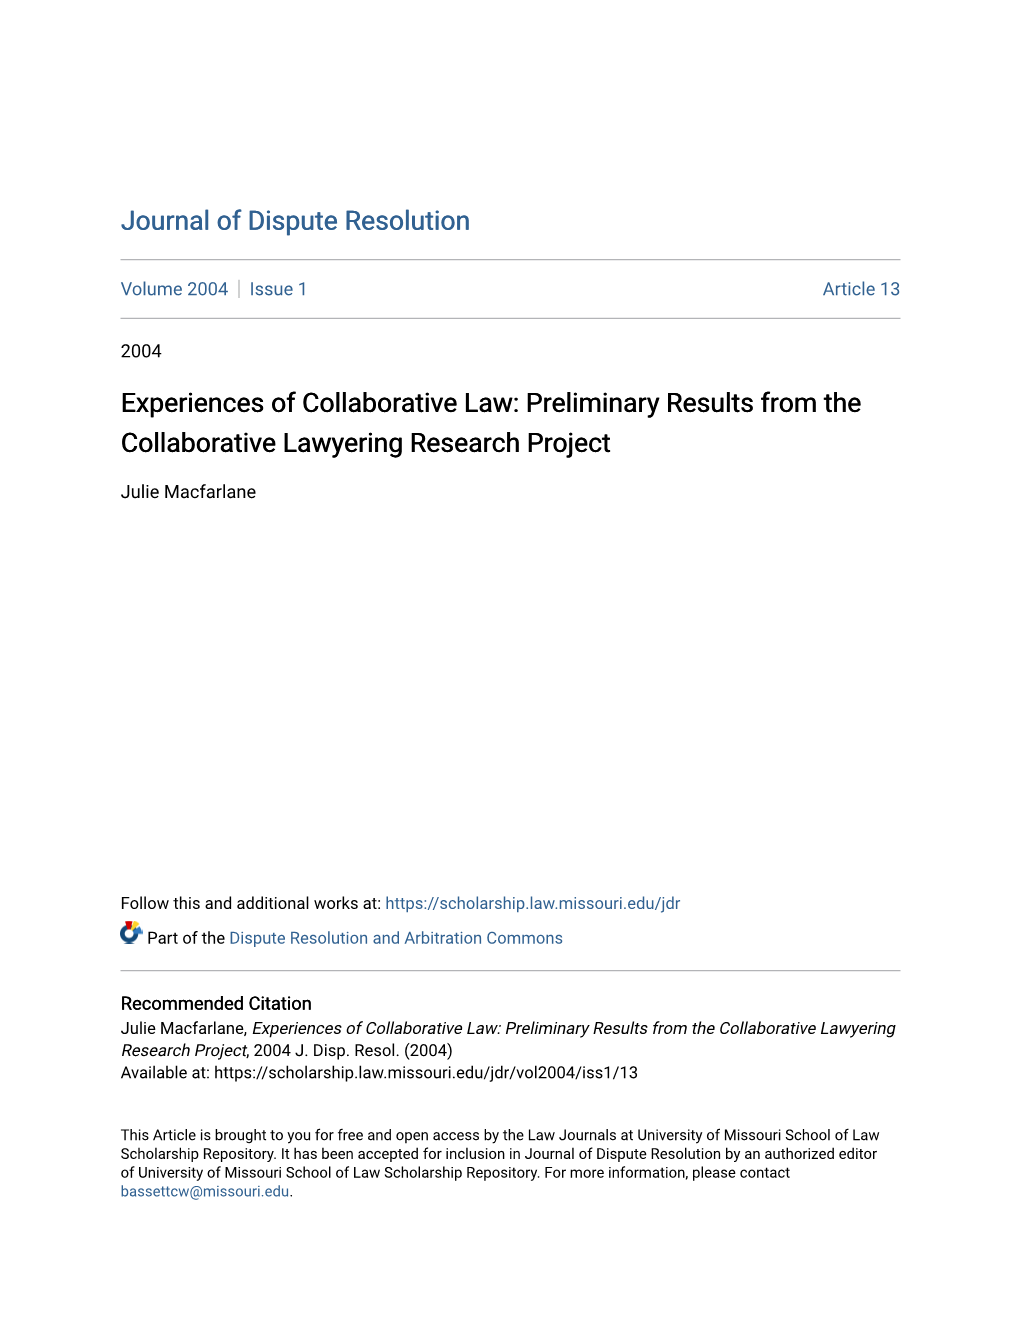 Experiences of Collaborative Law: Preliminary Results from the Collaborative Lawyering Research Project